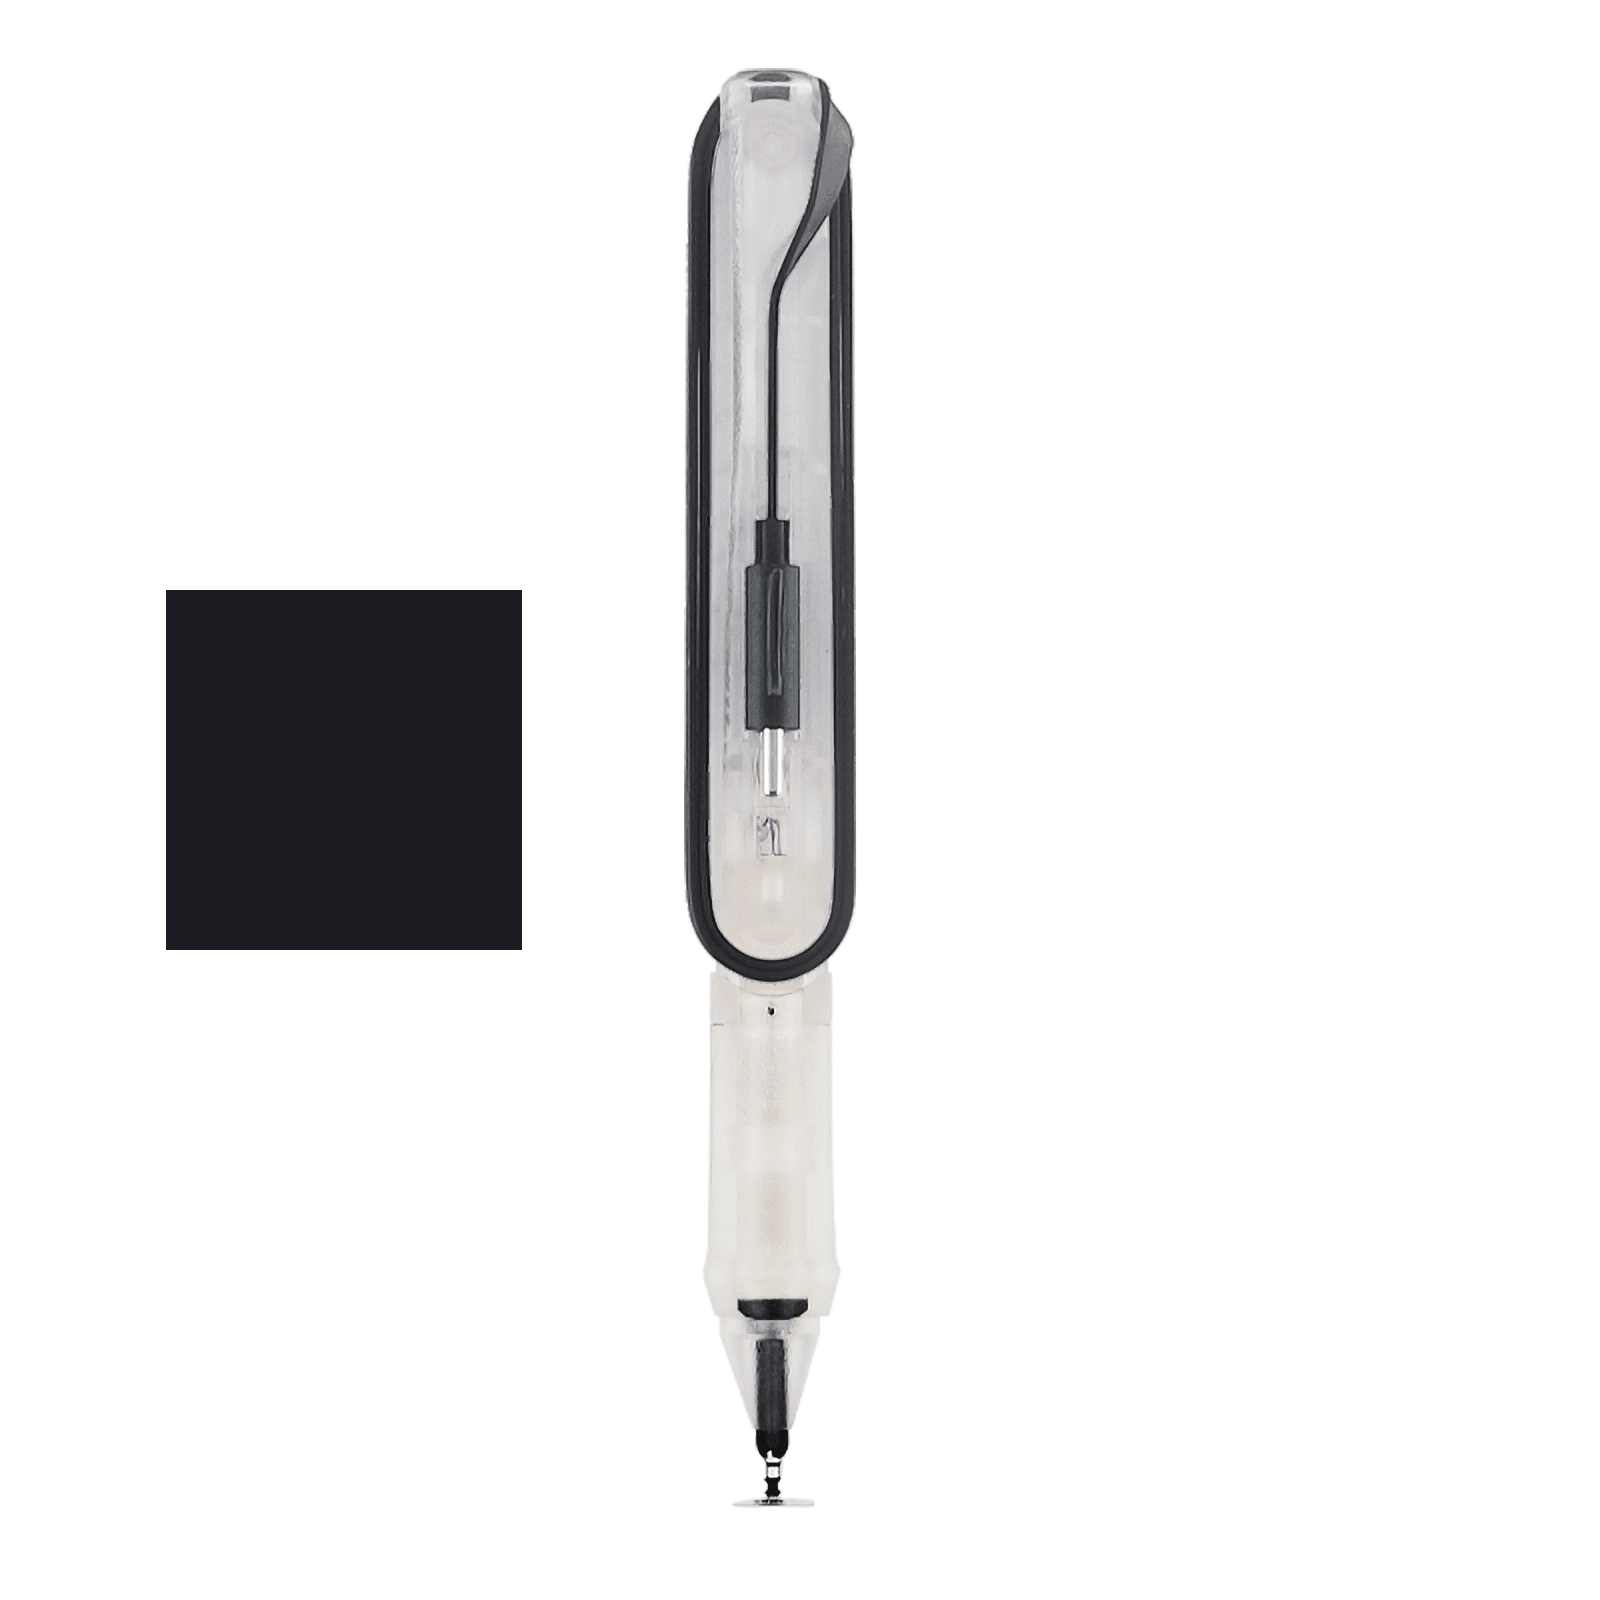 SonarPen: A cheap, pressure-sensitive stylus for sketching on